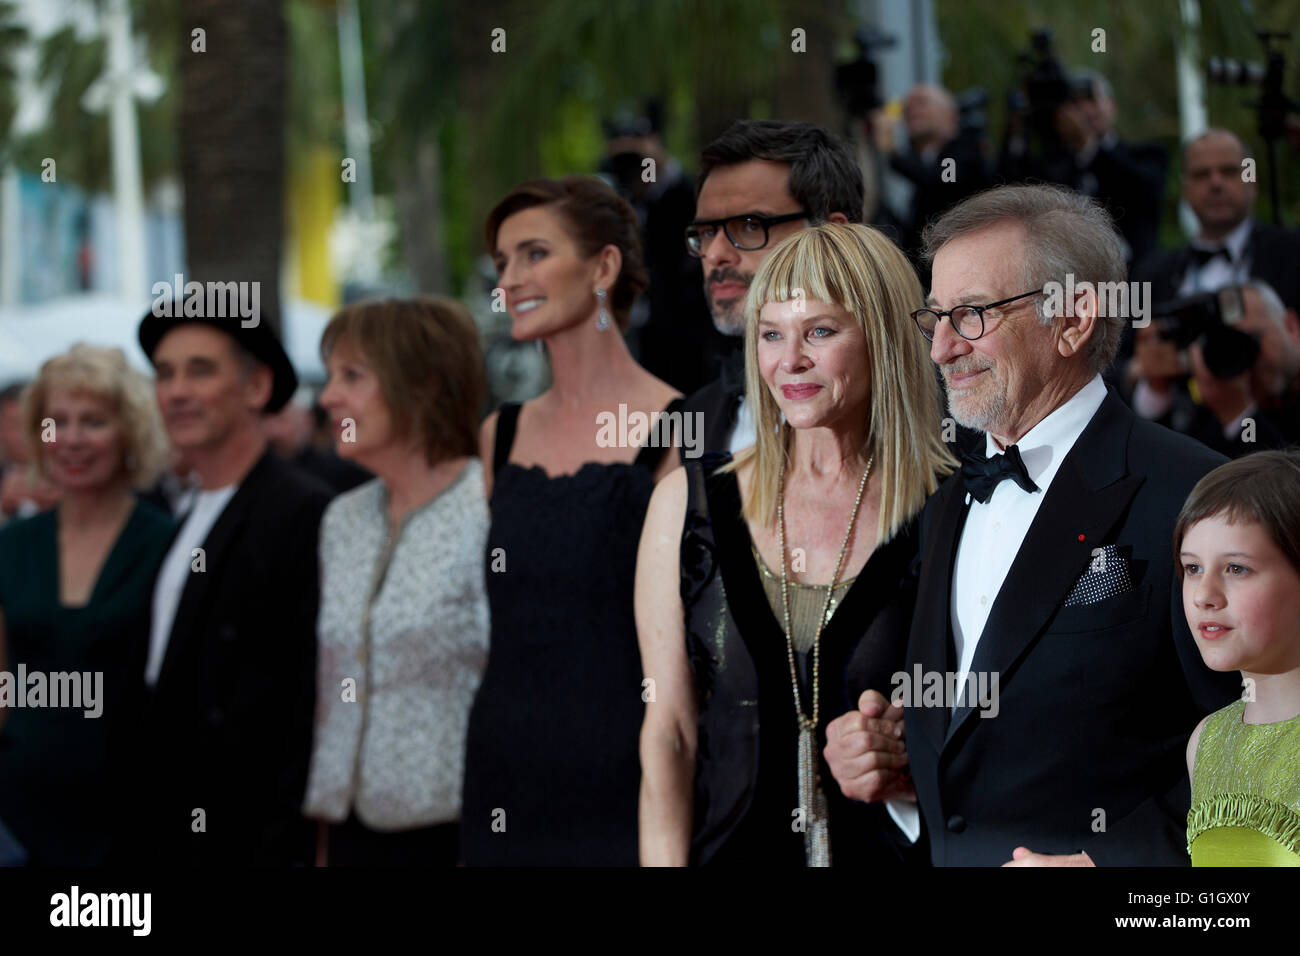 (160515) -- CANNES, May 15, 2016 (Xinhua) -- Director Steven Spielberg (2nd R), his wife Kate Capshaw (3rd R) and cast member Ruby Barnhill (1st R) pose on the red carpet as they arrive for the screening of the film 'The BFG' at the 69th Cannes Film Festival in Cannes, France, May 14, 2016.(Xinhua/Jin Yu) Stock Photo